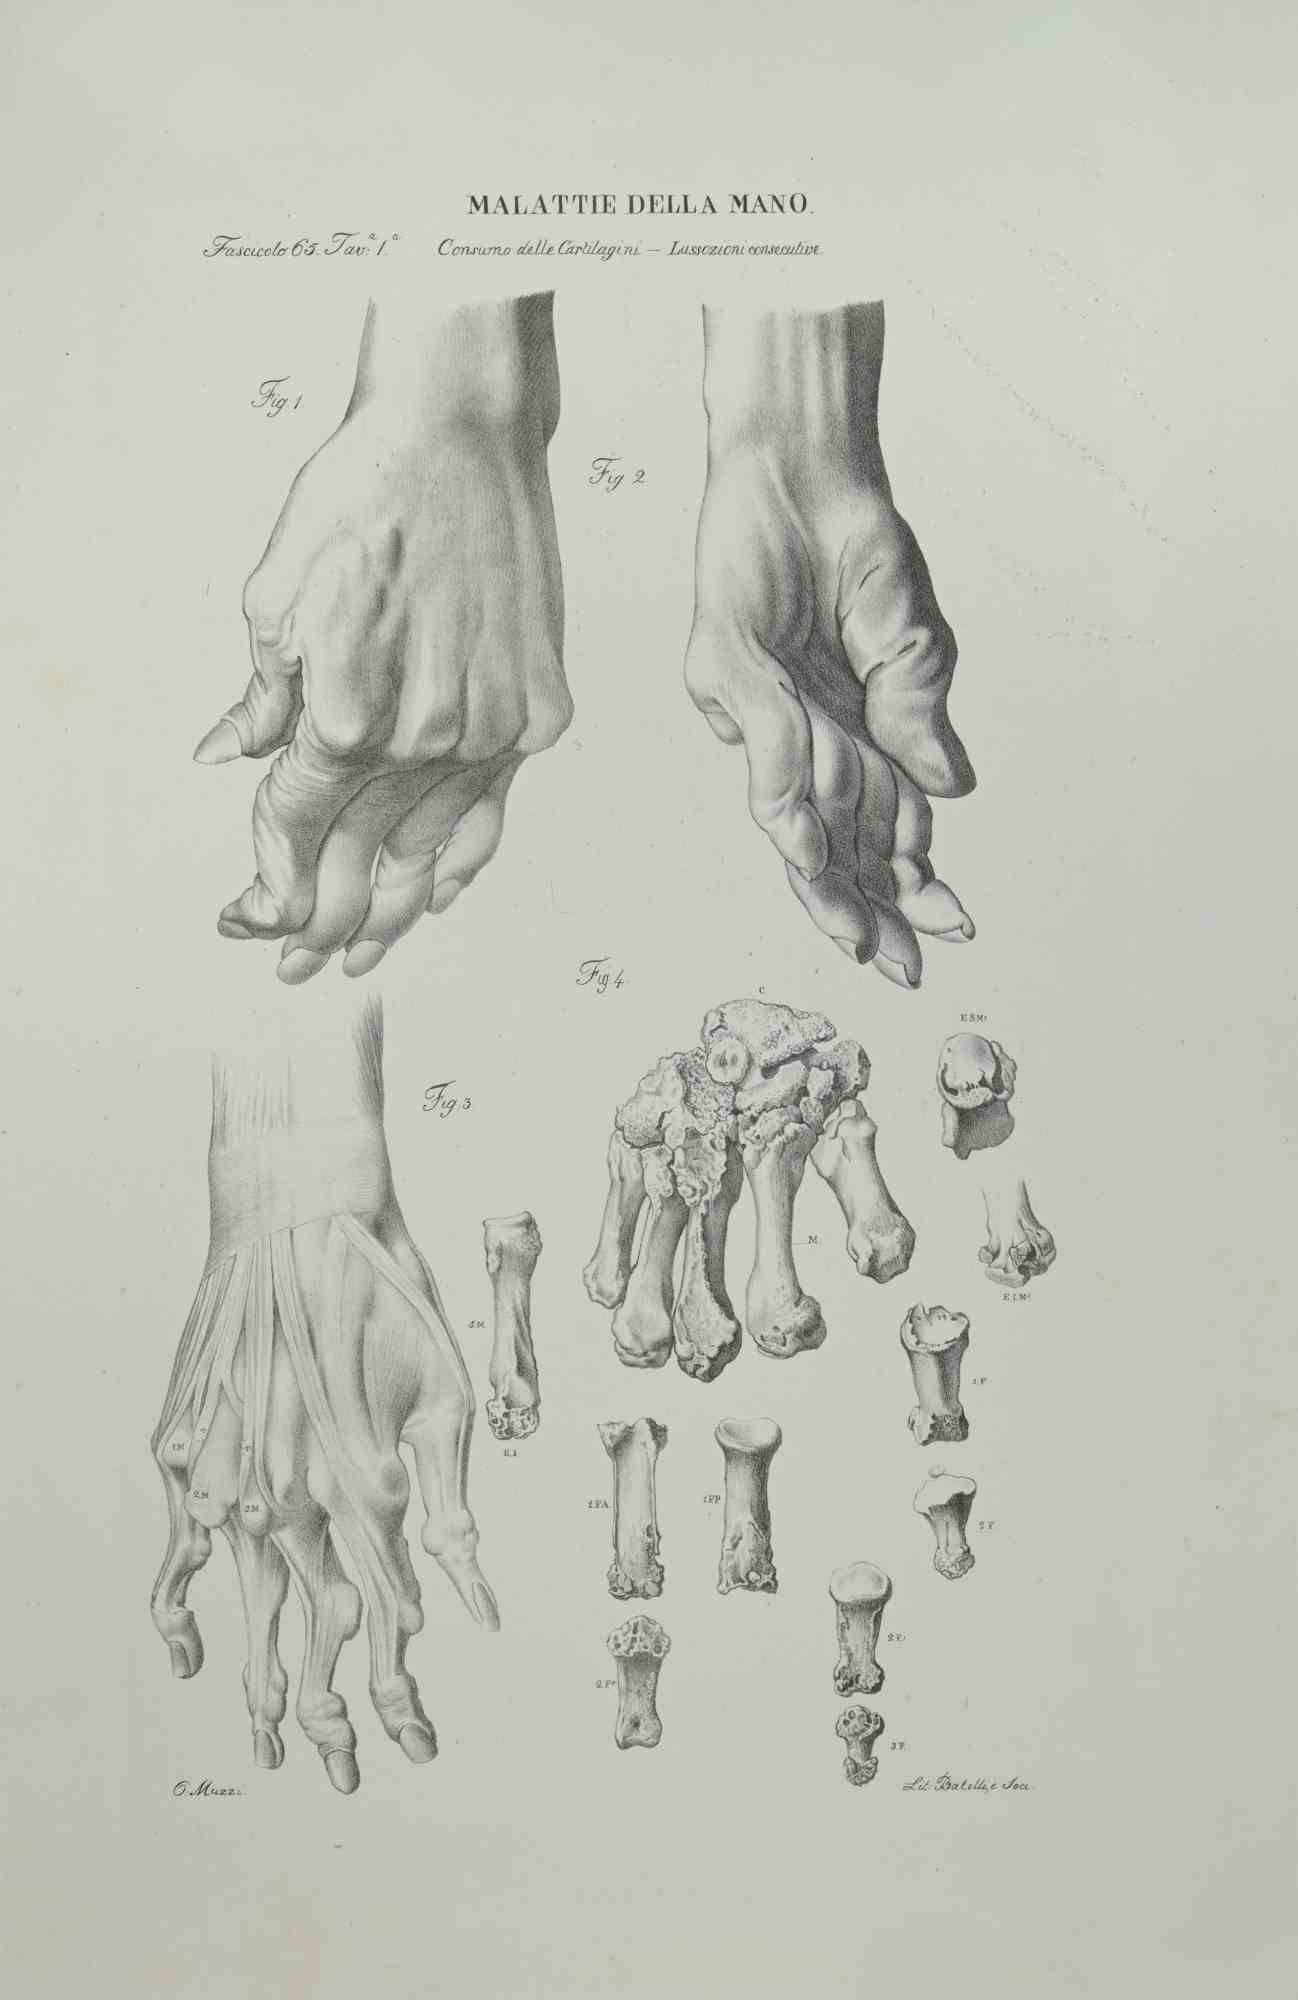 Hand Diseases is a lithograph realized by Ottavio Muzzi for the edition of Antoine Chazal, Human Anatomy, Printers Batelli and Ridolfi, 1843.

The work belongs to the Atlante generale della anatomia patologica del corpo umano by Jean CRUVEILHIER,